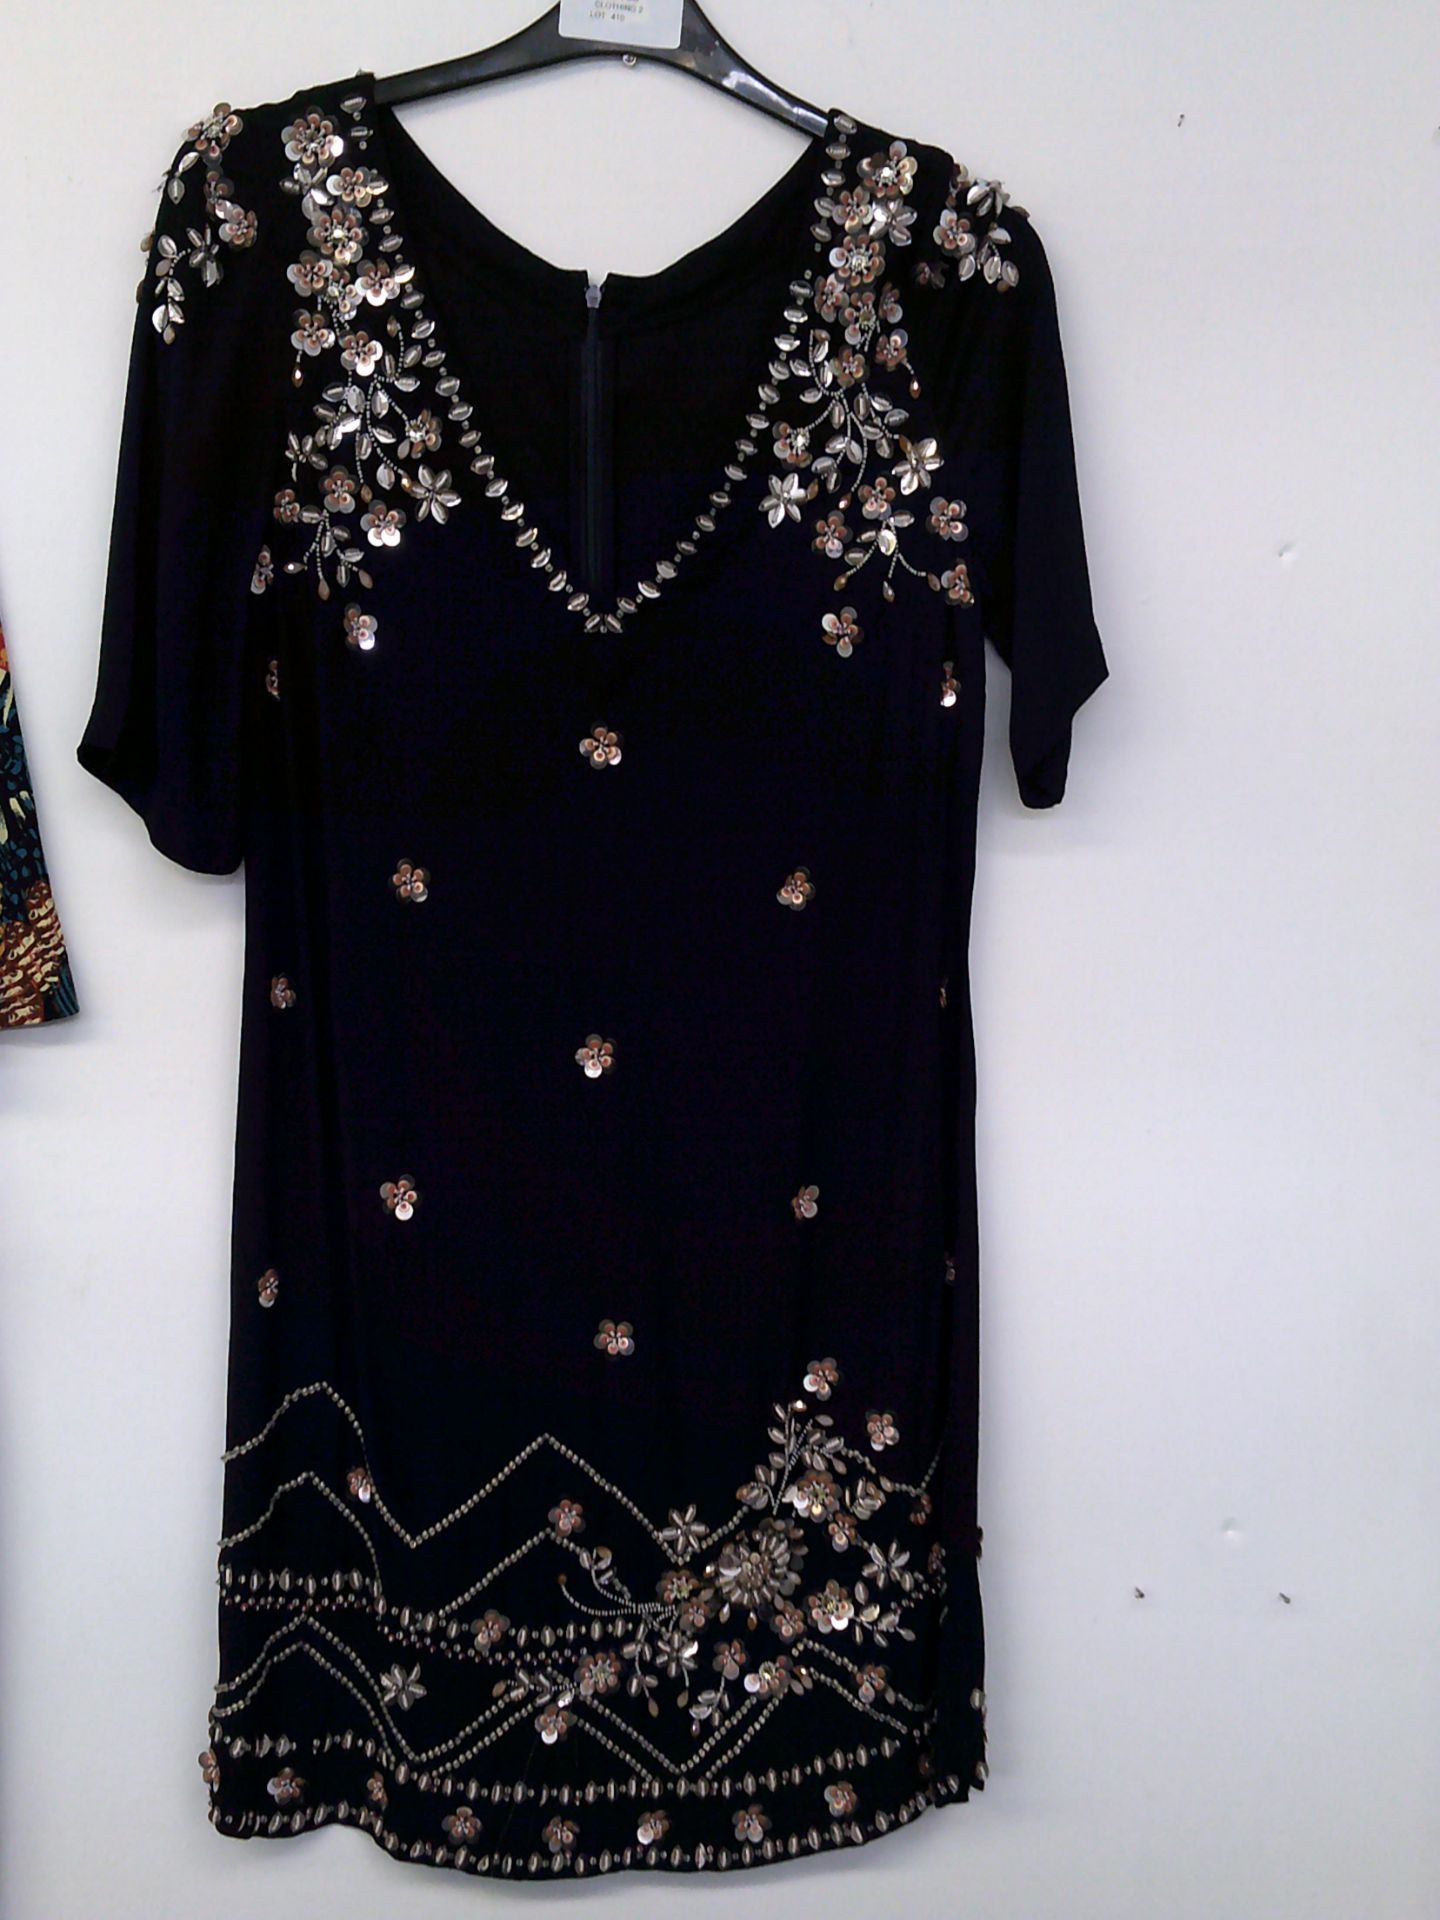 SEQUIN AND EMBRODIERED NAVY DRESS SIZE 12